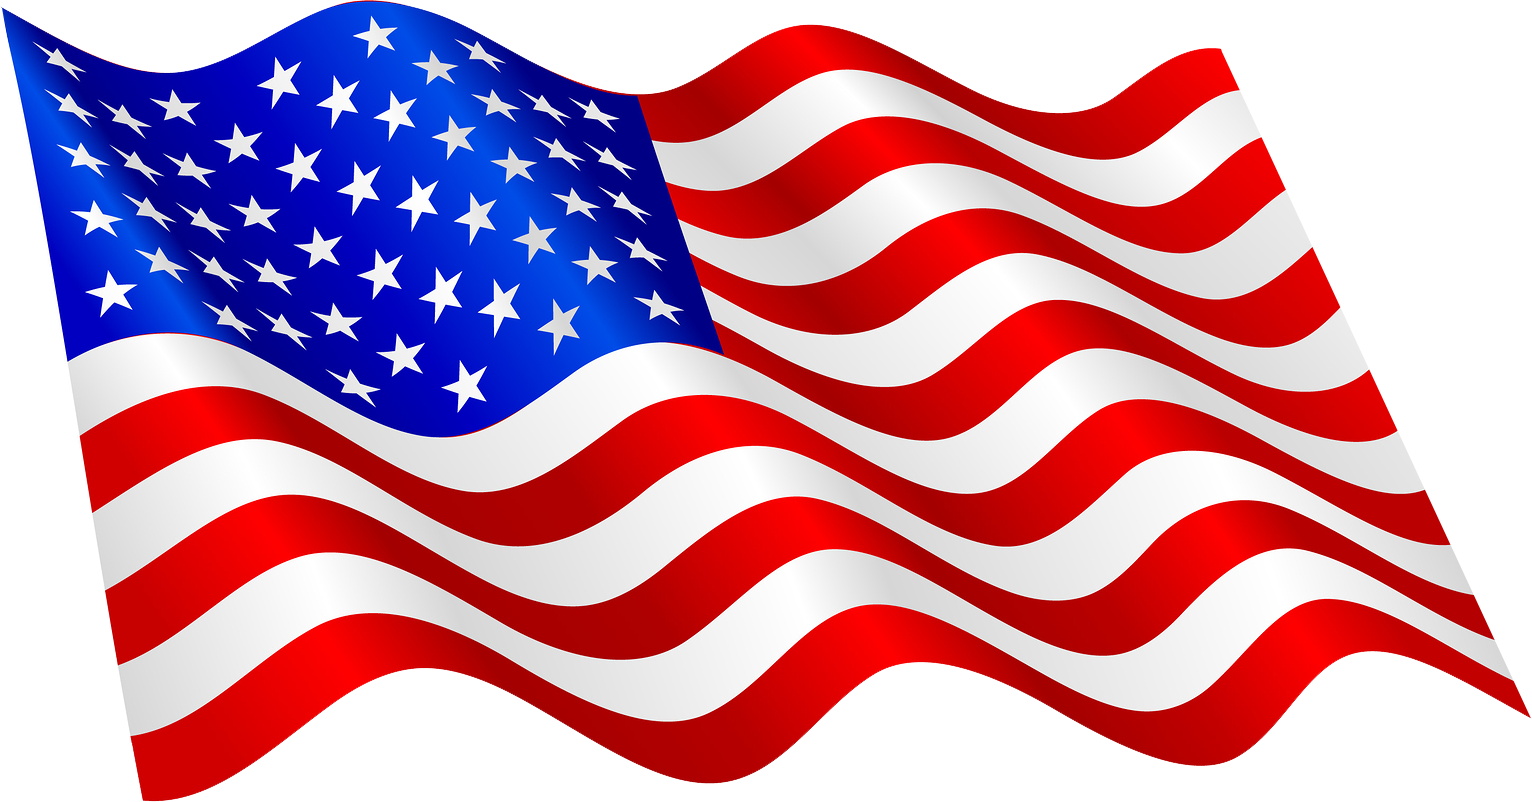 United States of America Flag PNG Transparent Images | PNG All